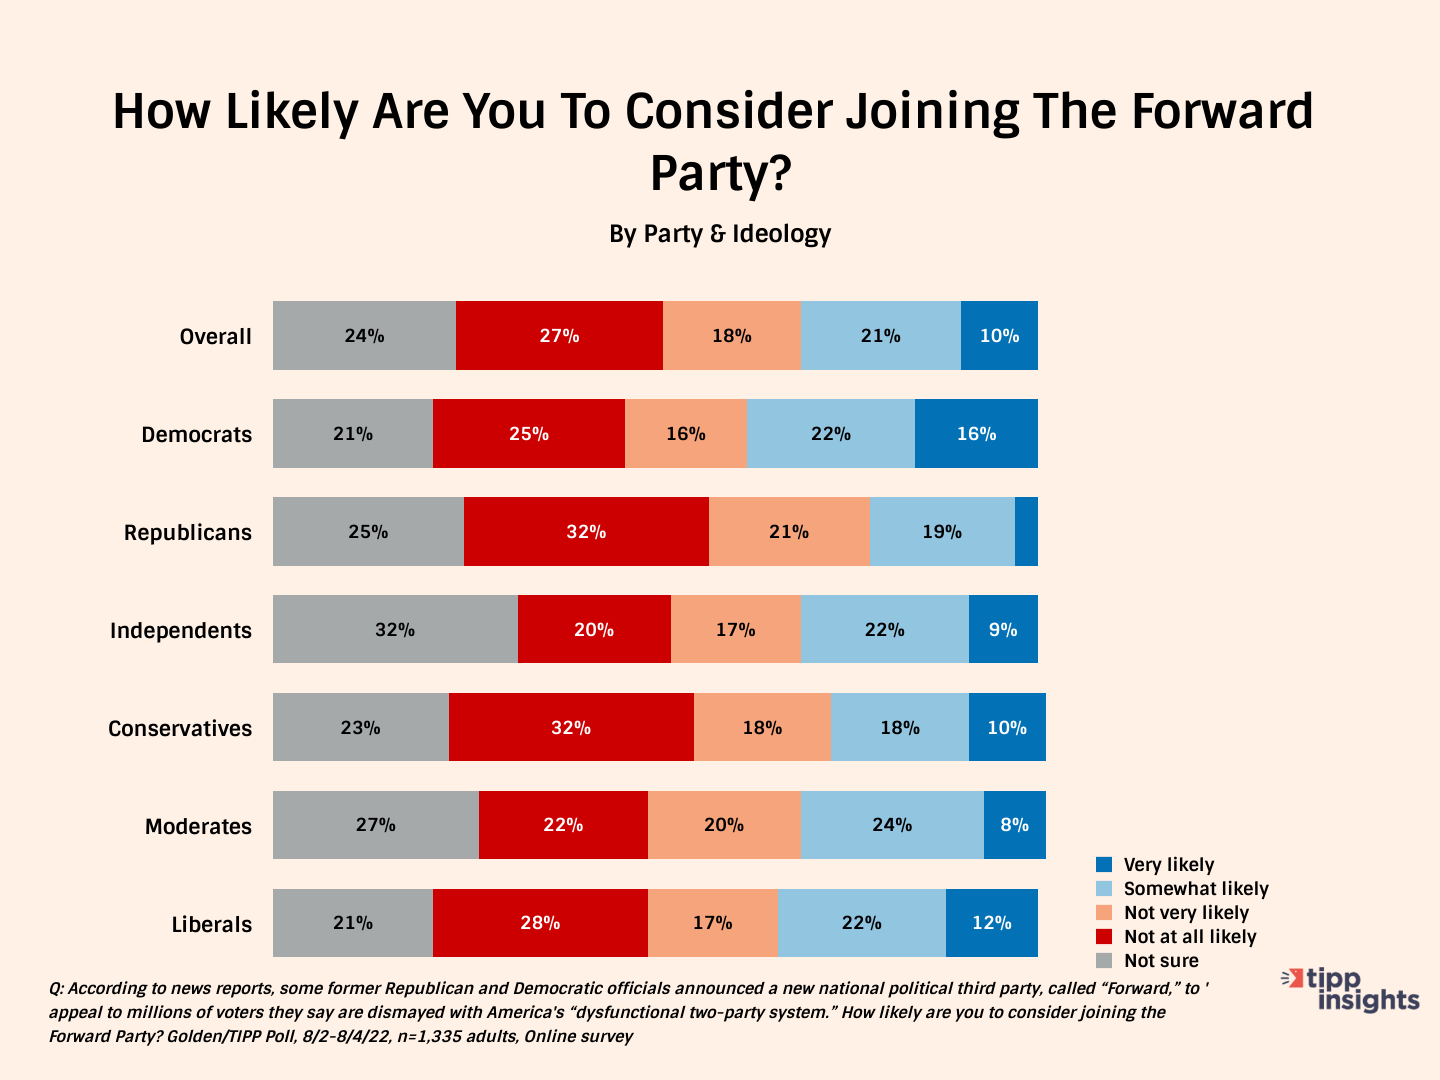 Golden/TIPP Poll results: 8/2-8/4/22 - How likely are Americans to consider joining the Forward Party (Chart)